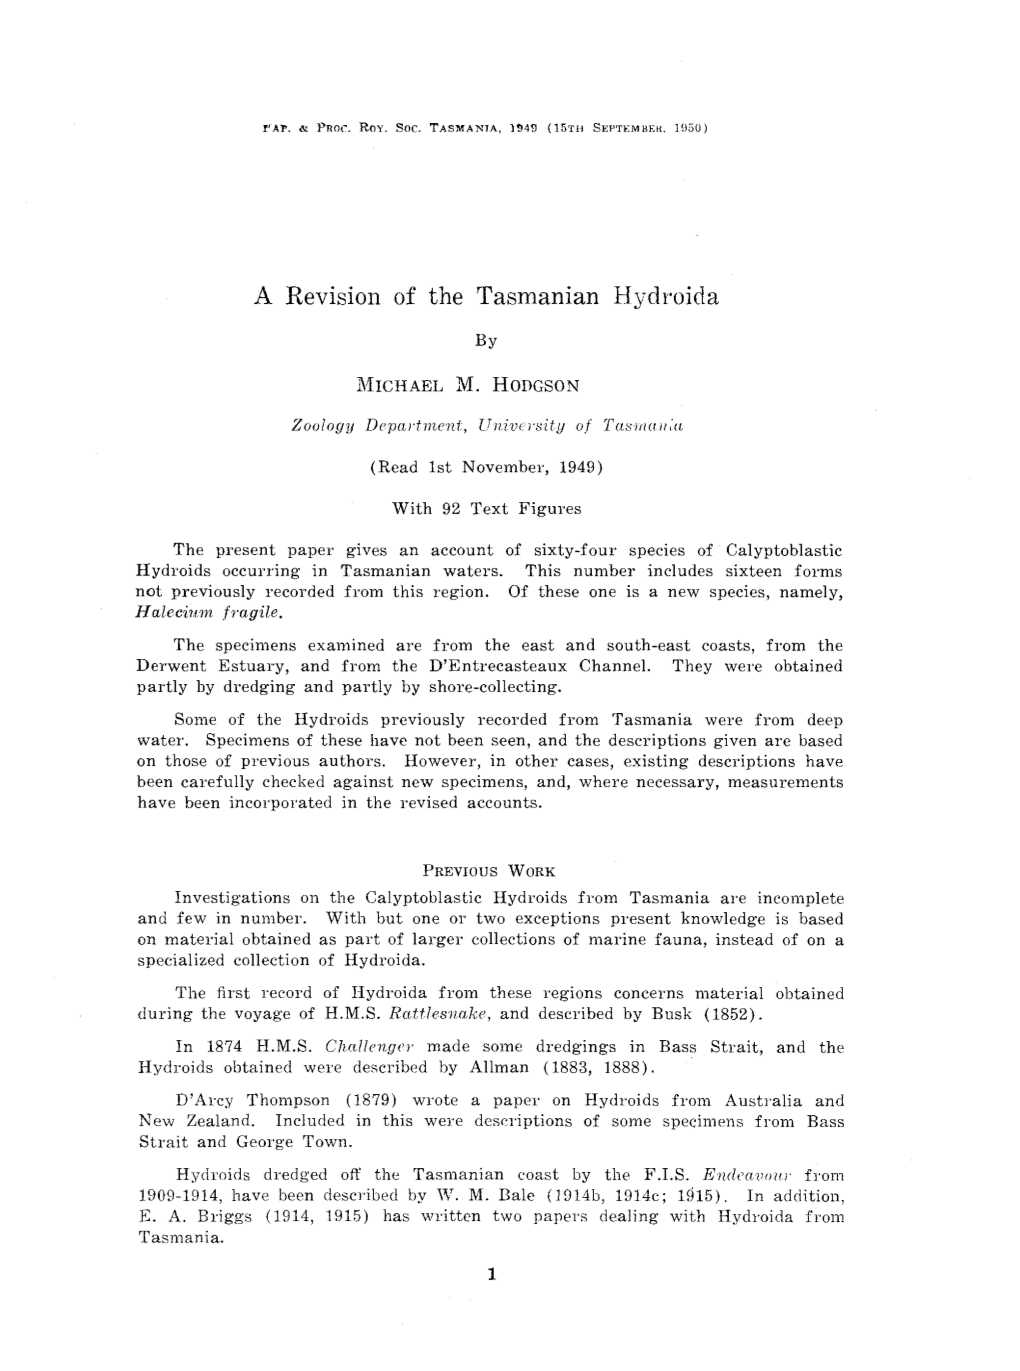 A Revision of the Tasmanian Hydroida